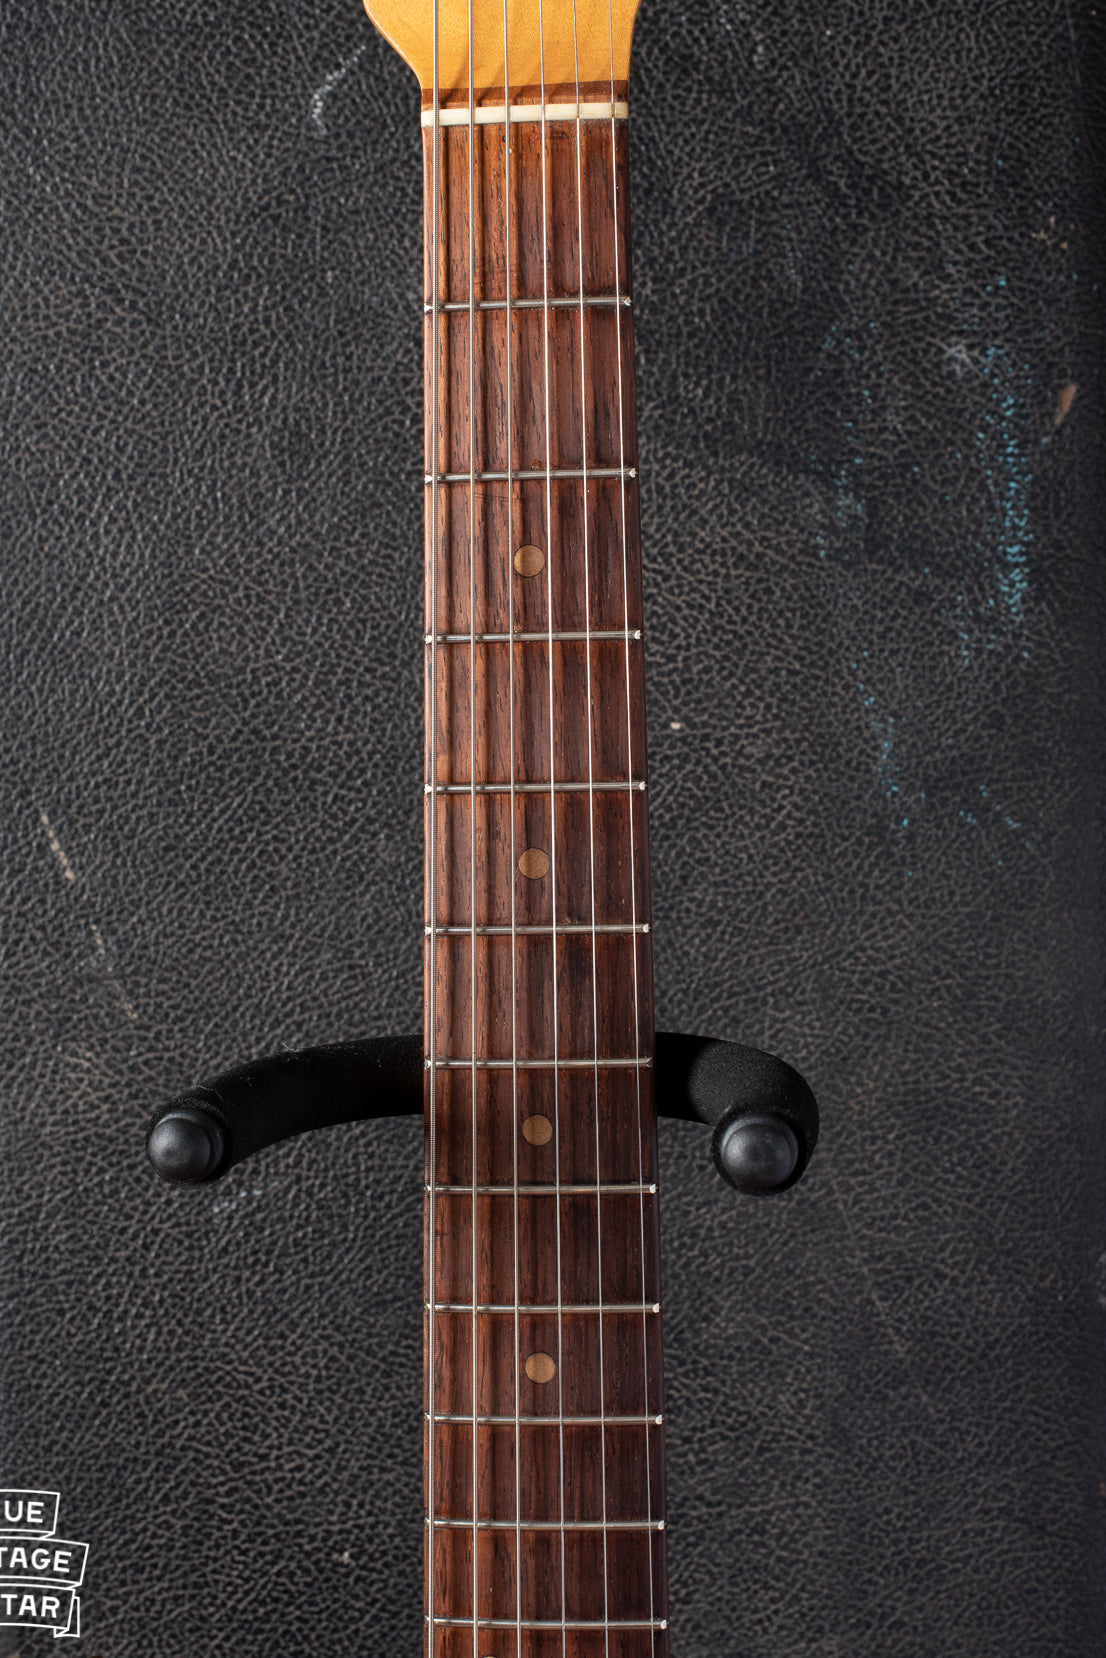 Fretboard with clay dots on Fender Stratocaster 1964